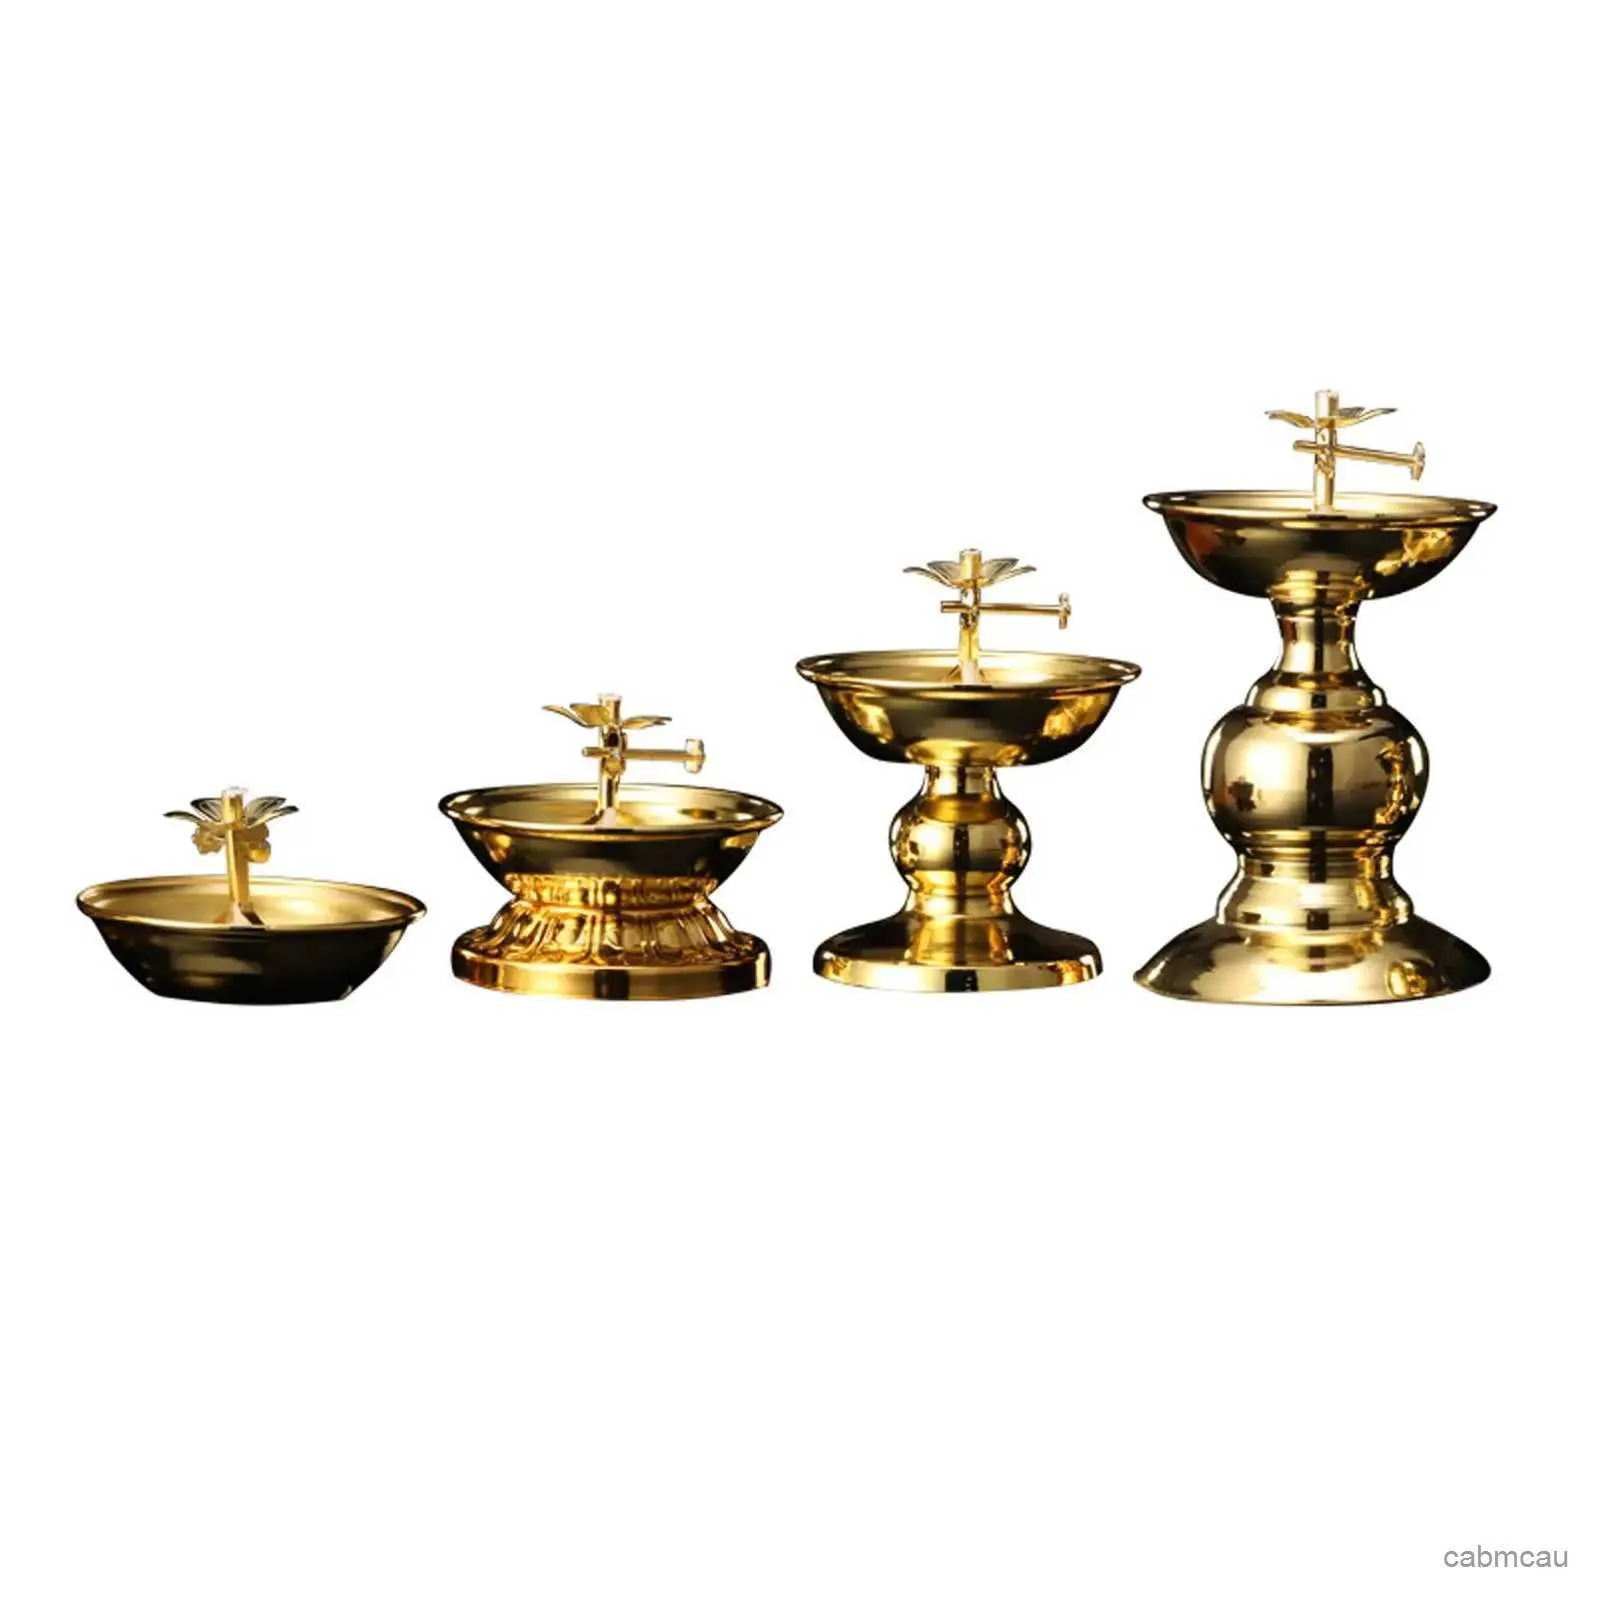 2st Candle Holders Ghee Lamp Holder Candle Holder Temples Tibetan Buddhist Supplies Golden Cup Oil Lamp Holder For Dining Table Office Decoration